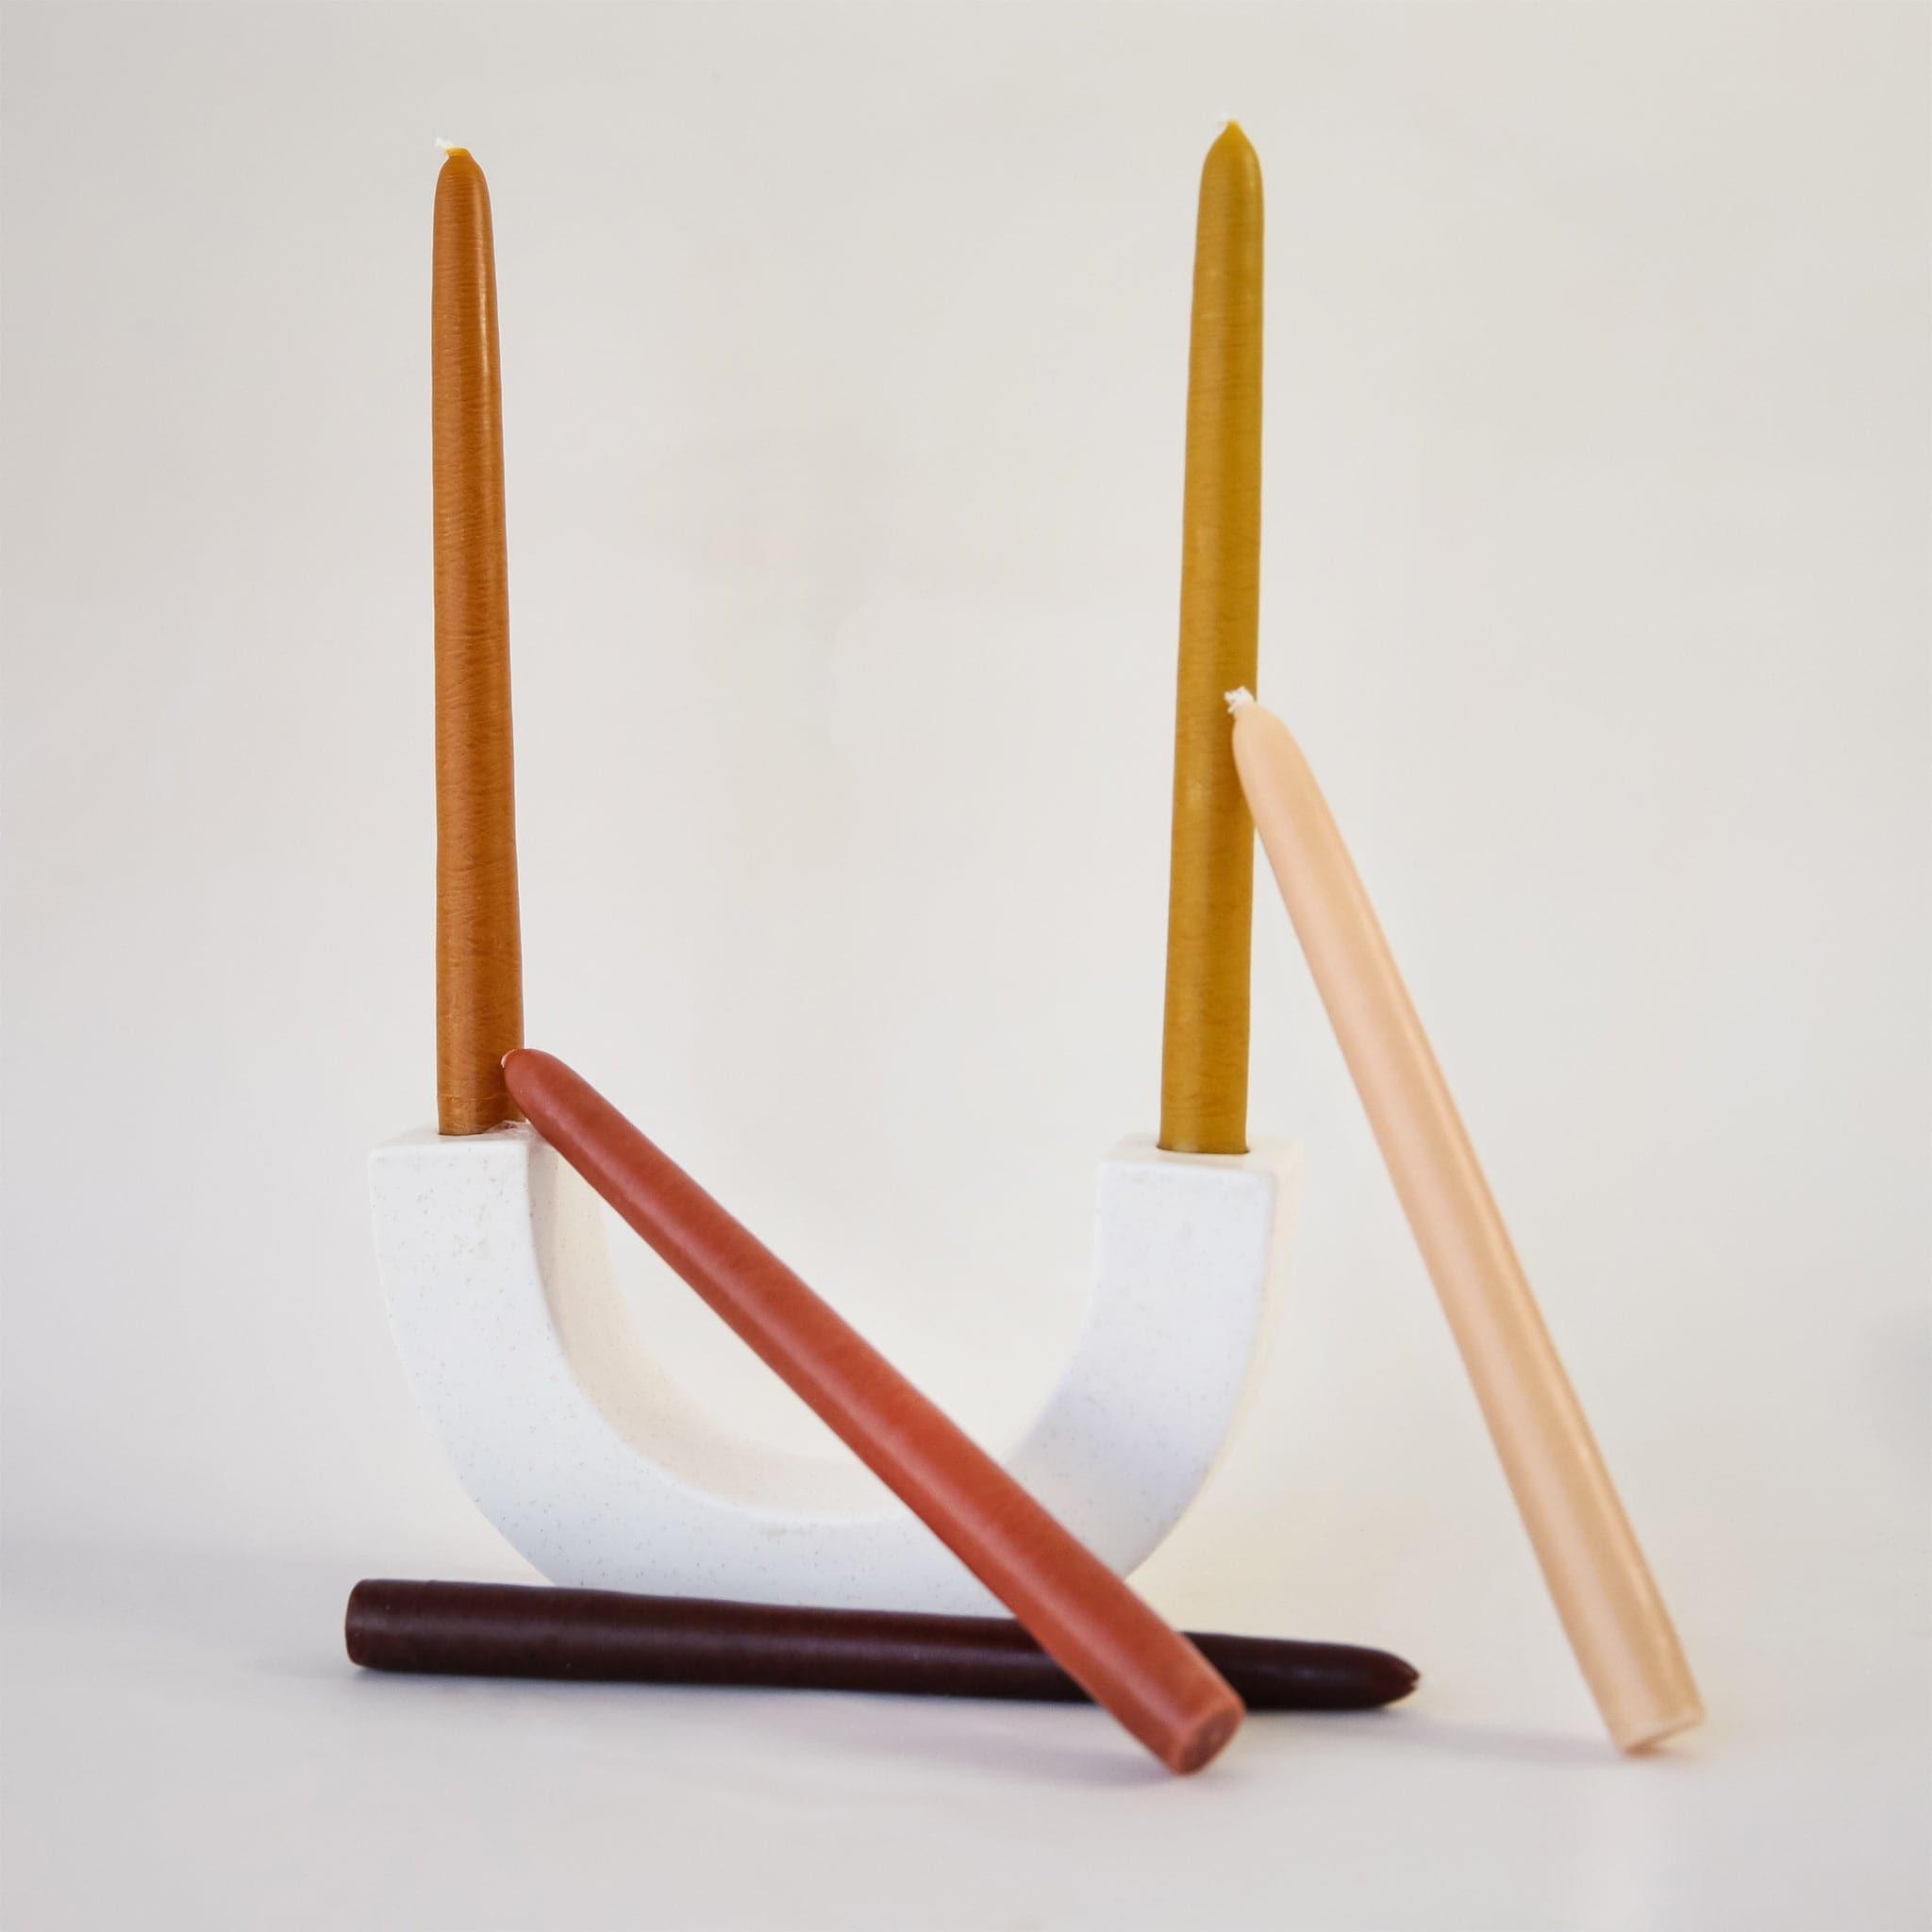 Two earth toned candles positioned on white 'U' shaped candle holder. Three candles in shades of peach and magenta lay against the candle holder.